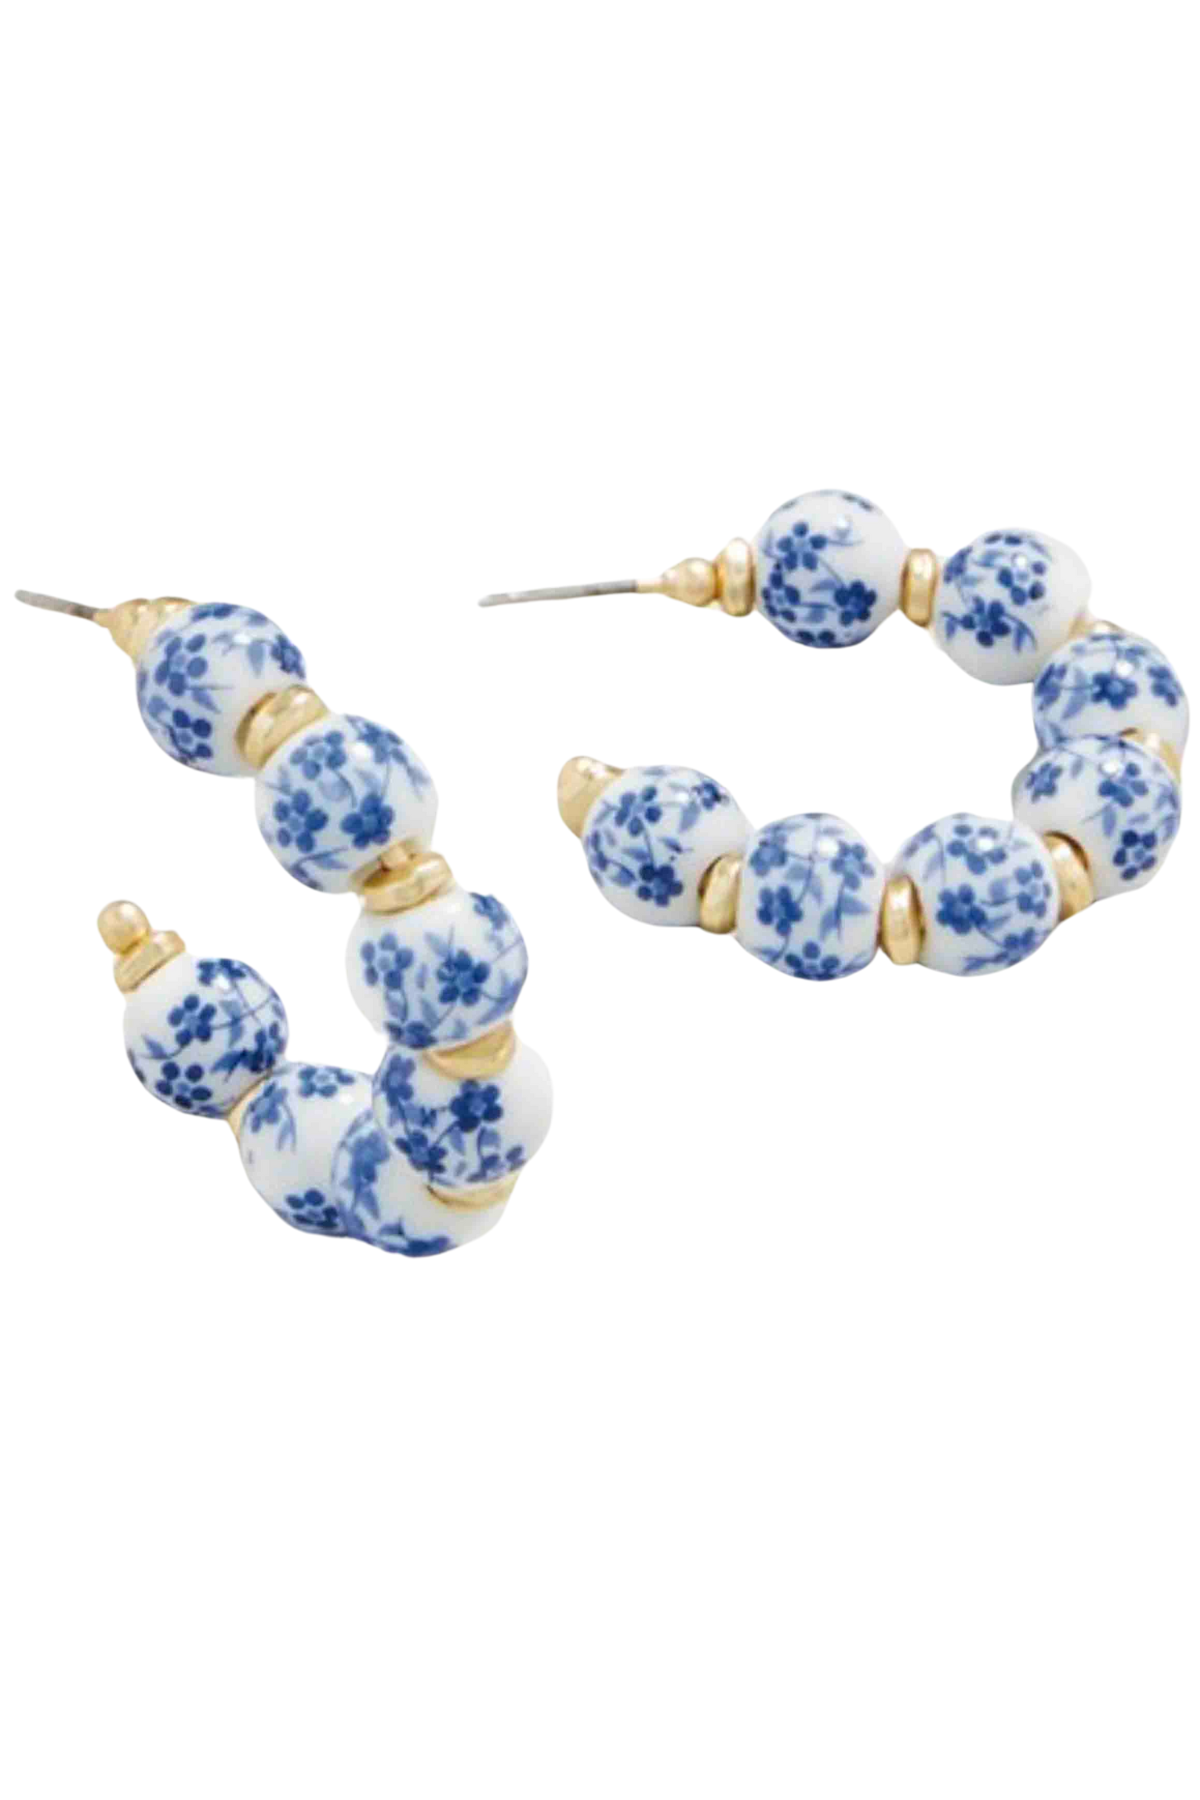 Annabelle blue and white beaded ceramic hoop earrings with blue flowers by Spartina 449